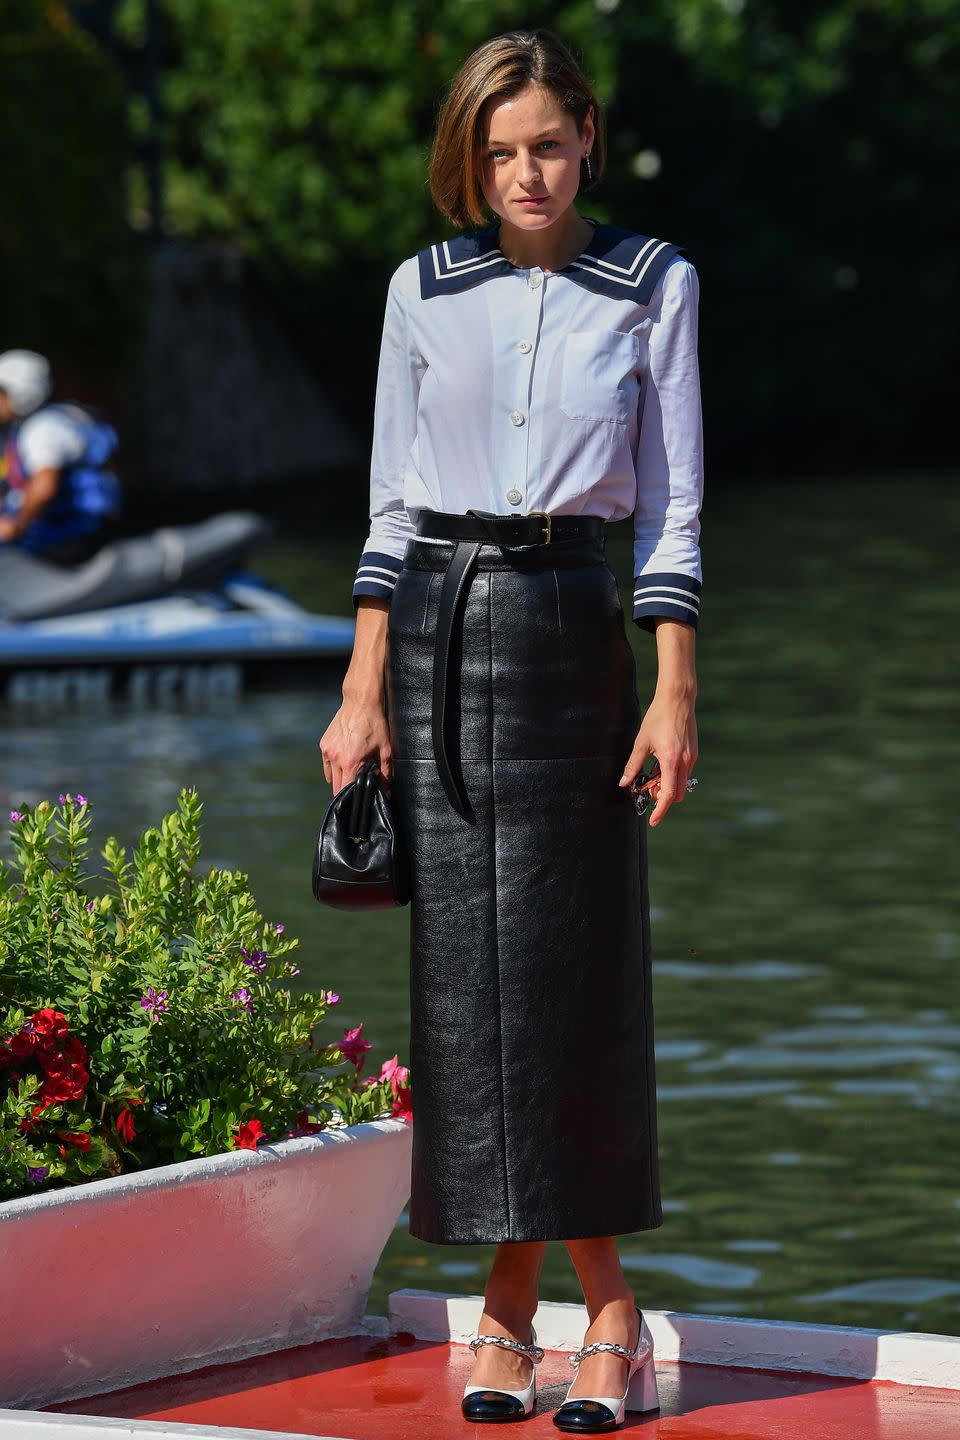 <p><strong>Wearing:</strong> Head-to-toe Miu Miu, complete with a sailor-inspired shirt and a leather midi skirt.</p><p><strong>Where:</strong> Venice Film Festival, September 2020.</p>